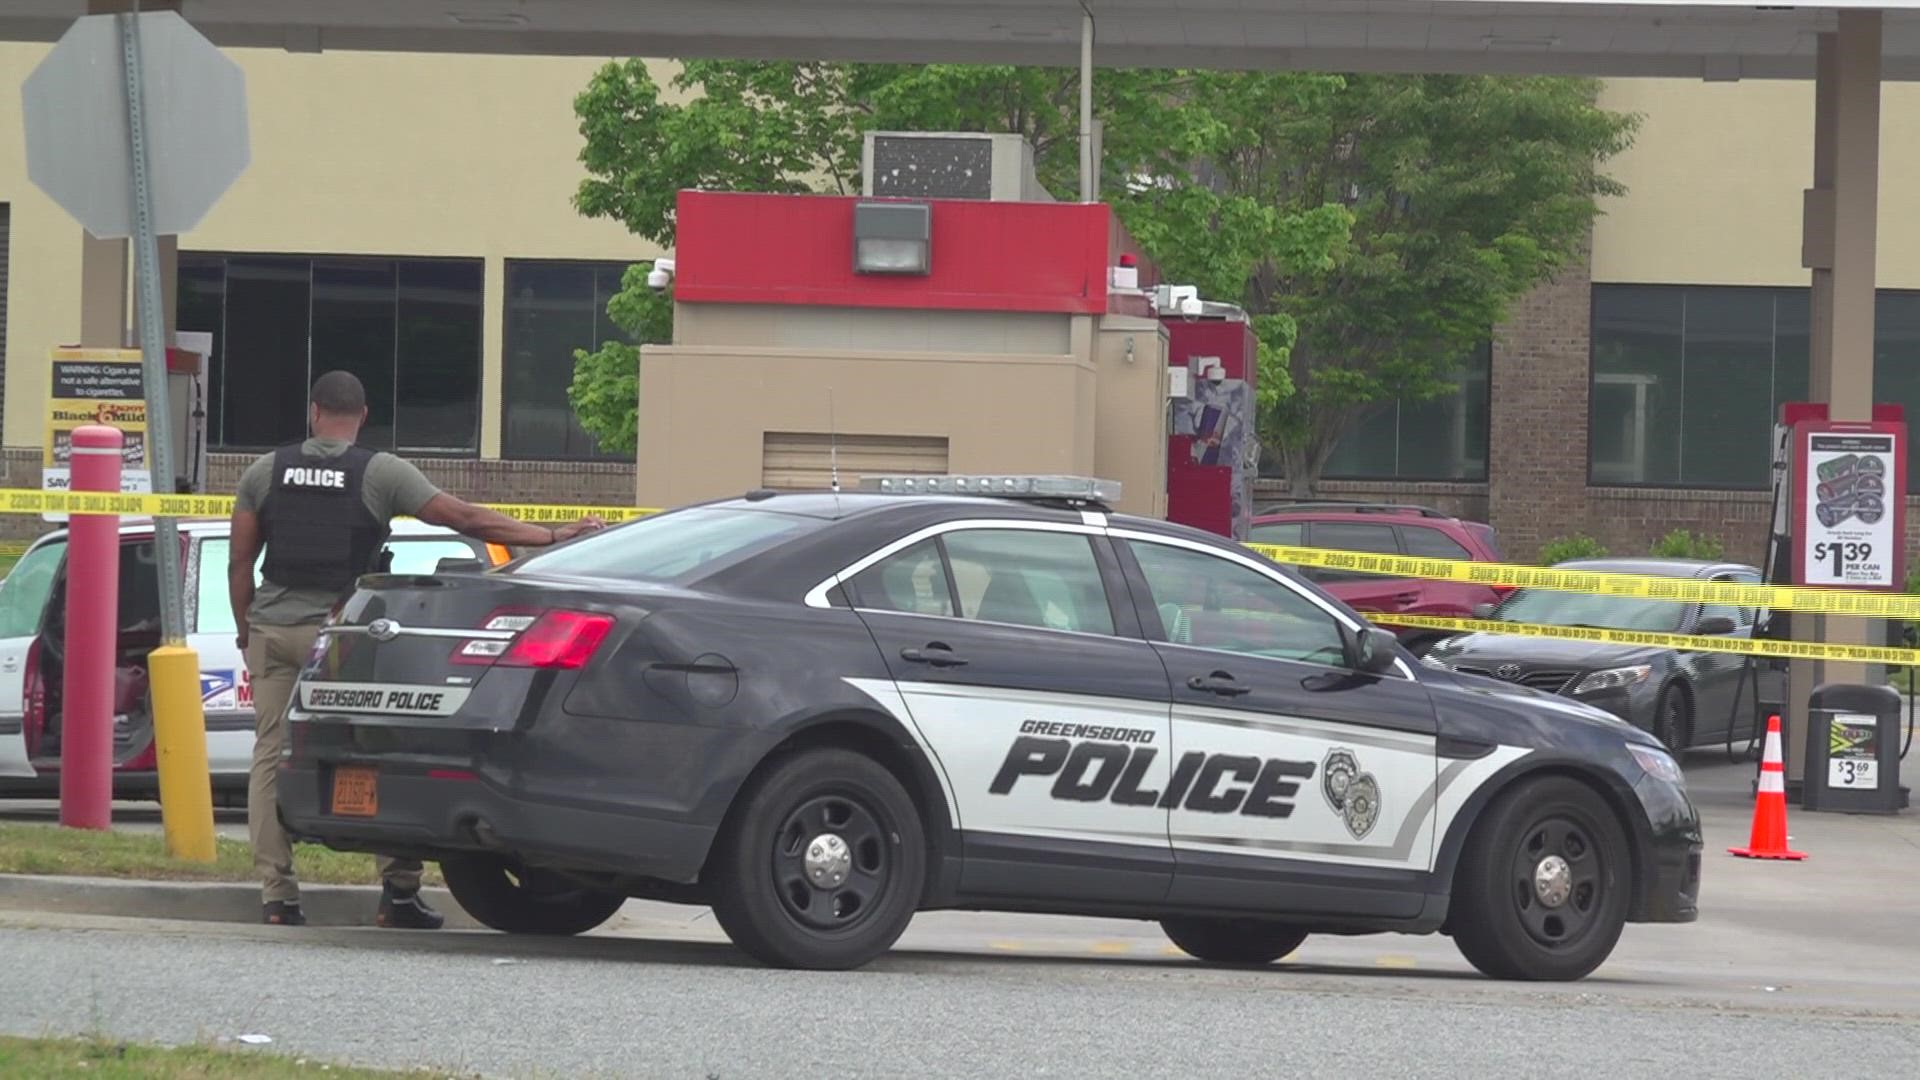 Greensboro police said no one was hurt in a shooting at a gas station on Pyramids Village Boulevard.